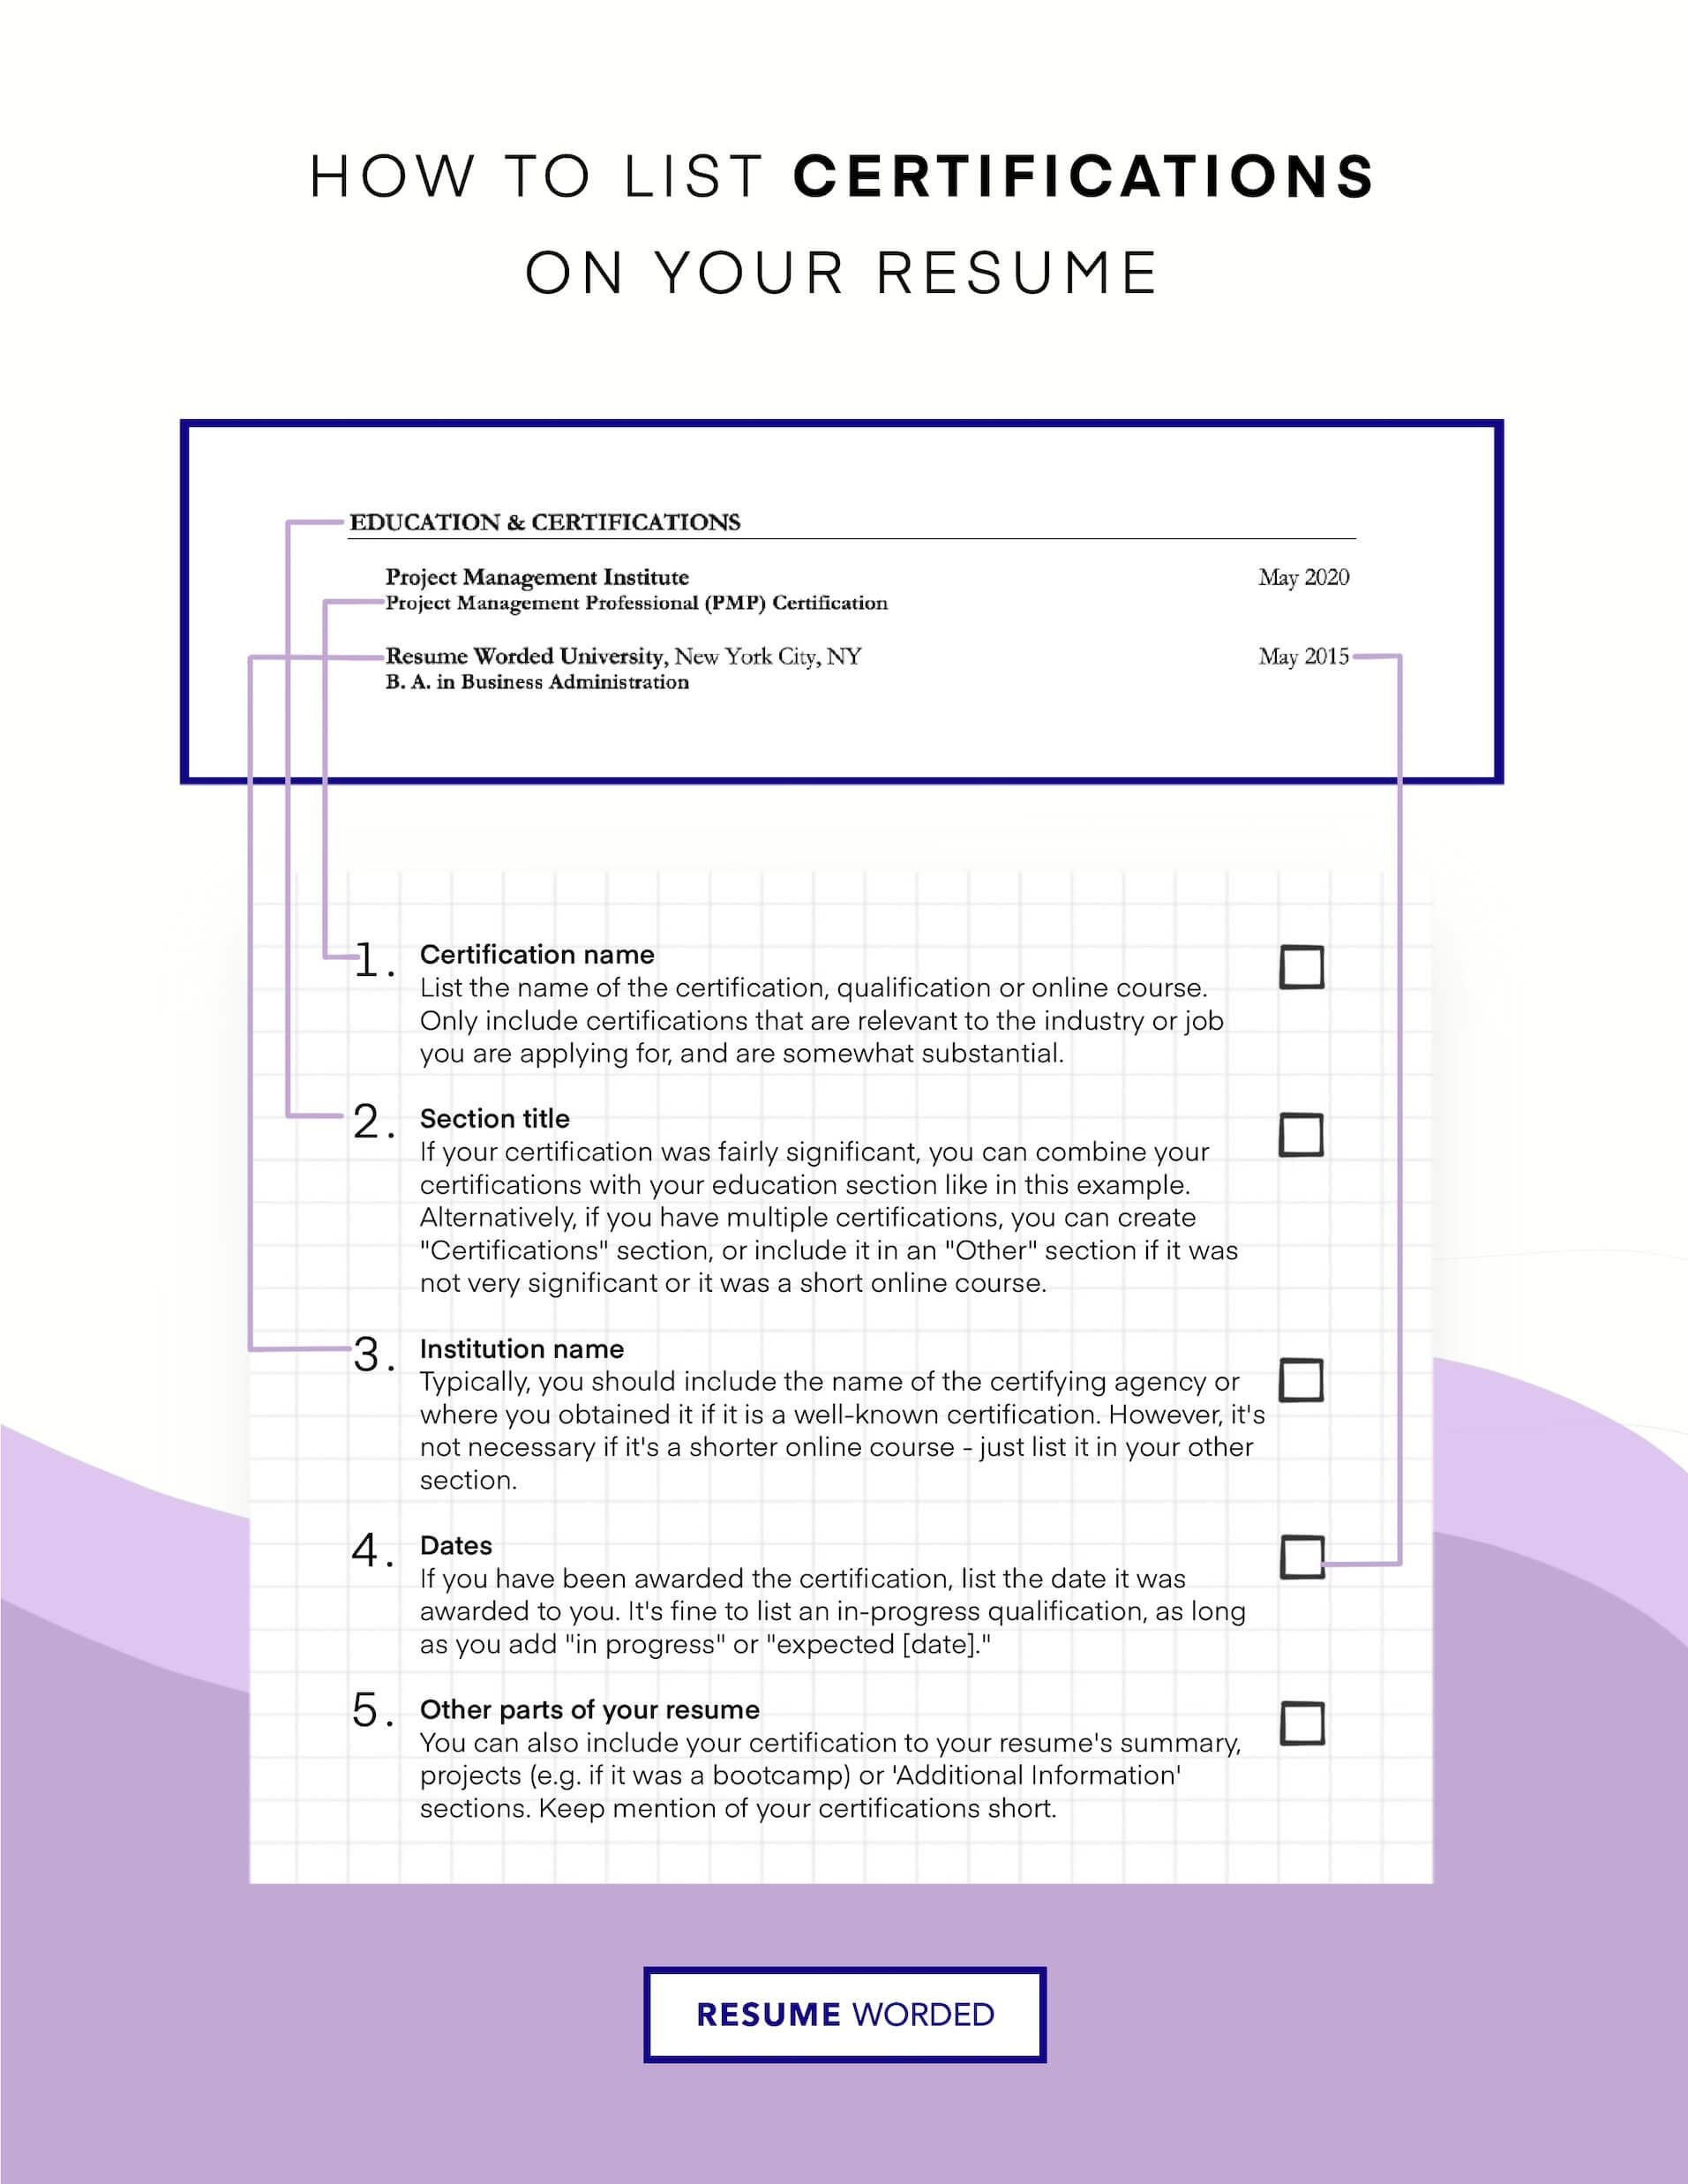 Show off your nursing certifications - Relief Charge Nurse CV